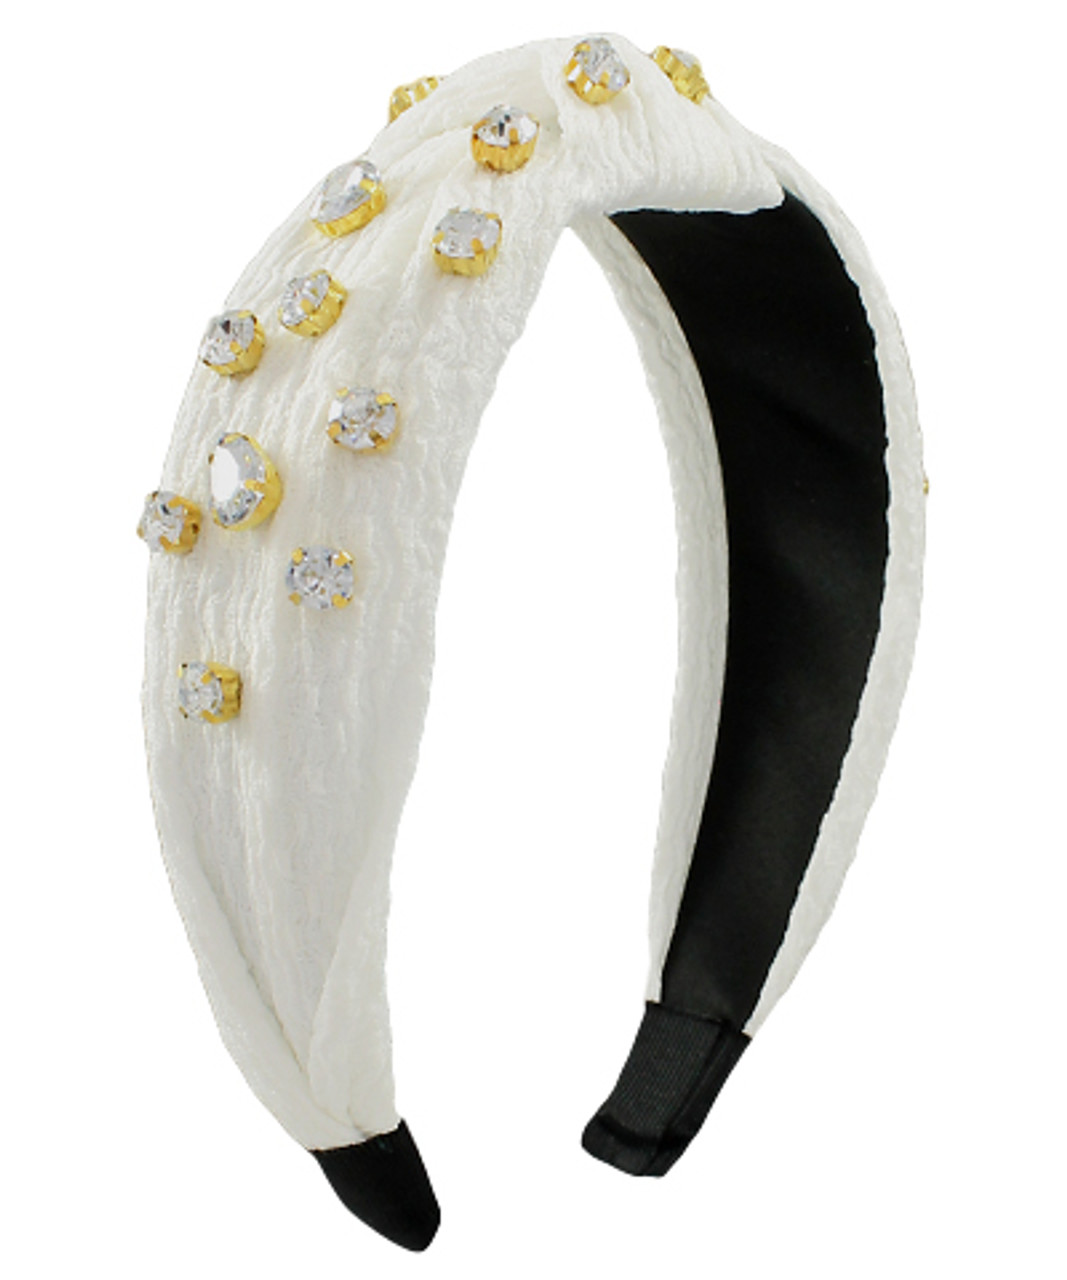 White Headband With Stones - I Just Have to Have It